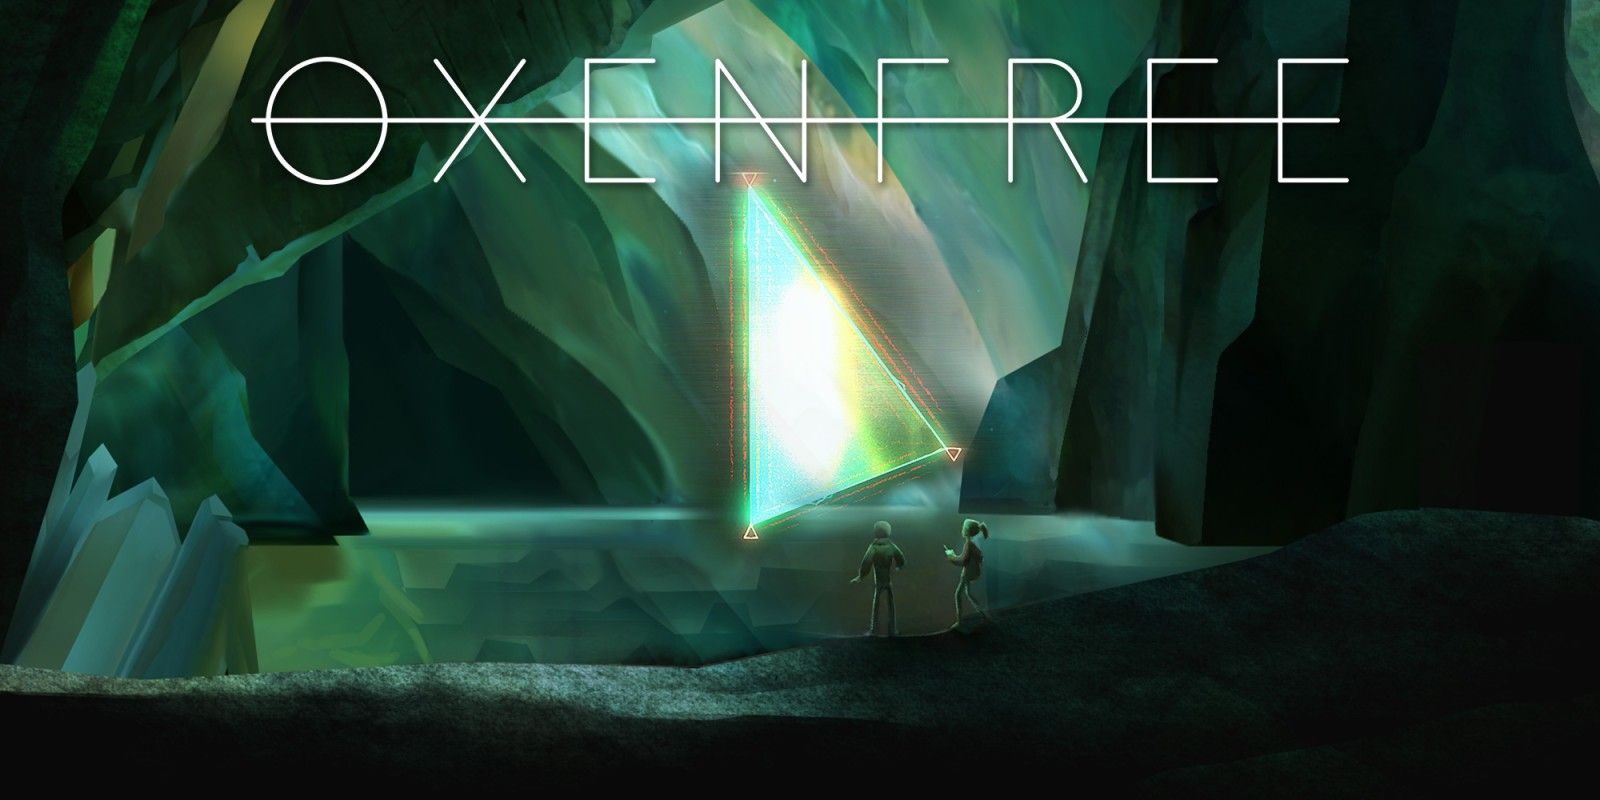 oxenfree art showing two characters and a supernatural event